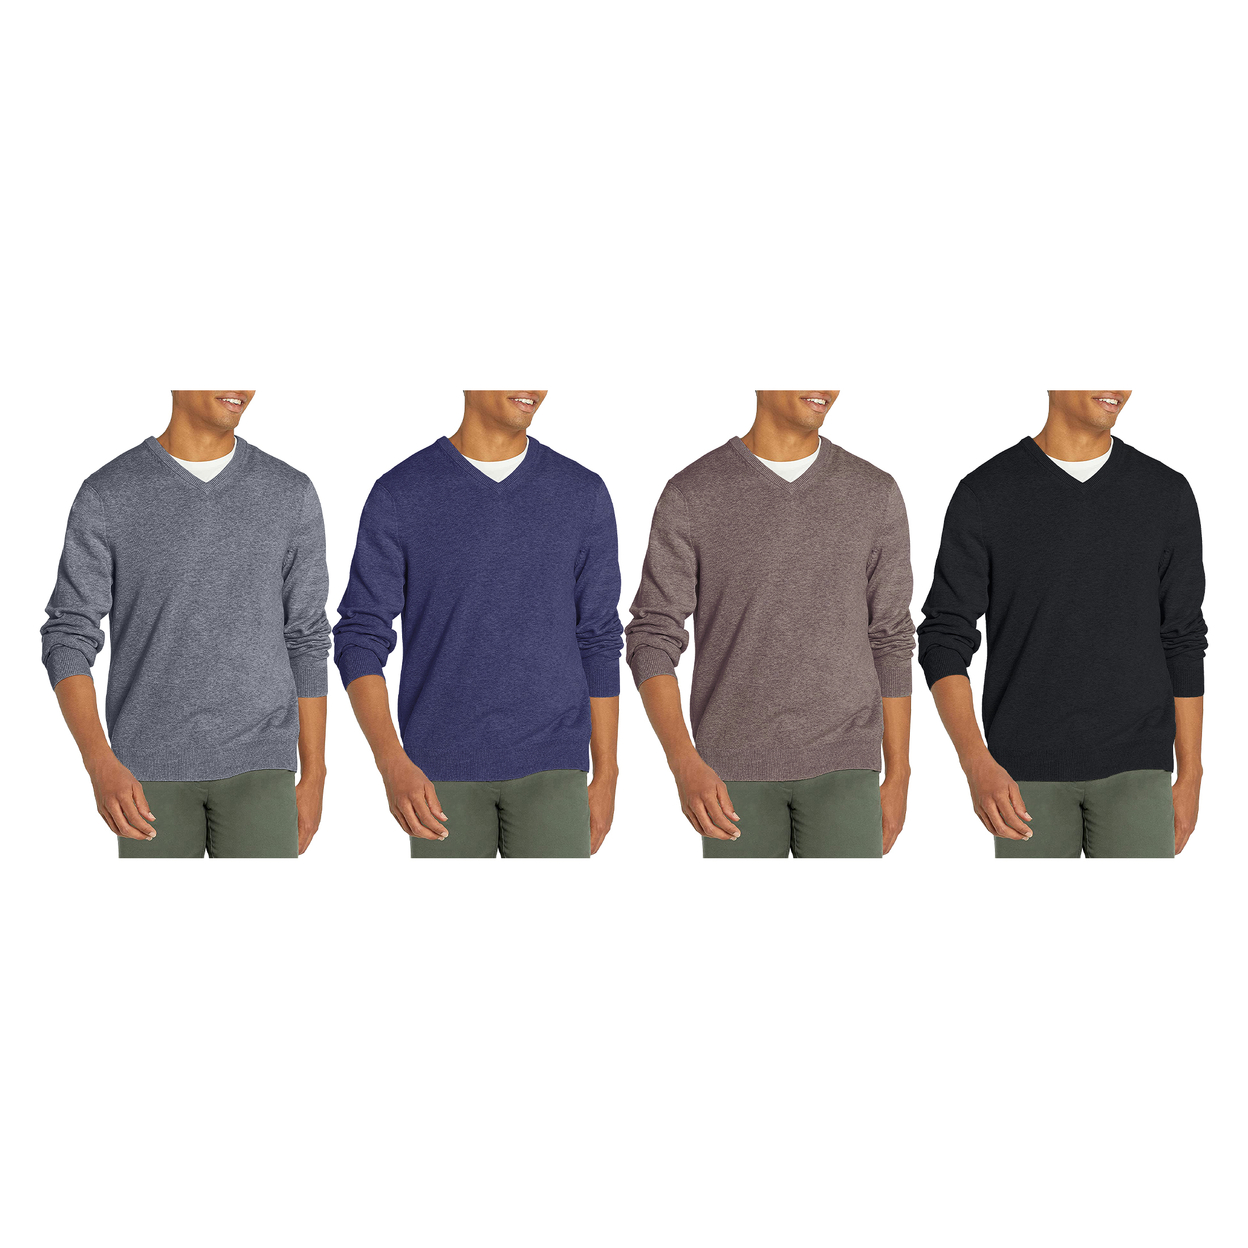 Multi-Pack: Men's Casual Ultra Soft Slim Fit Warm Knit V-Neck Sweater - 2-pack, X-large